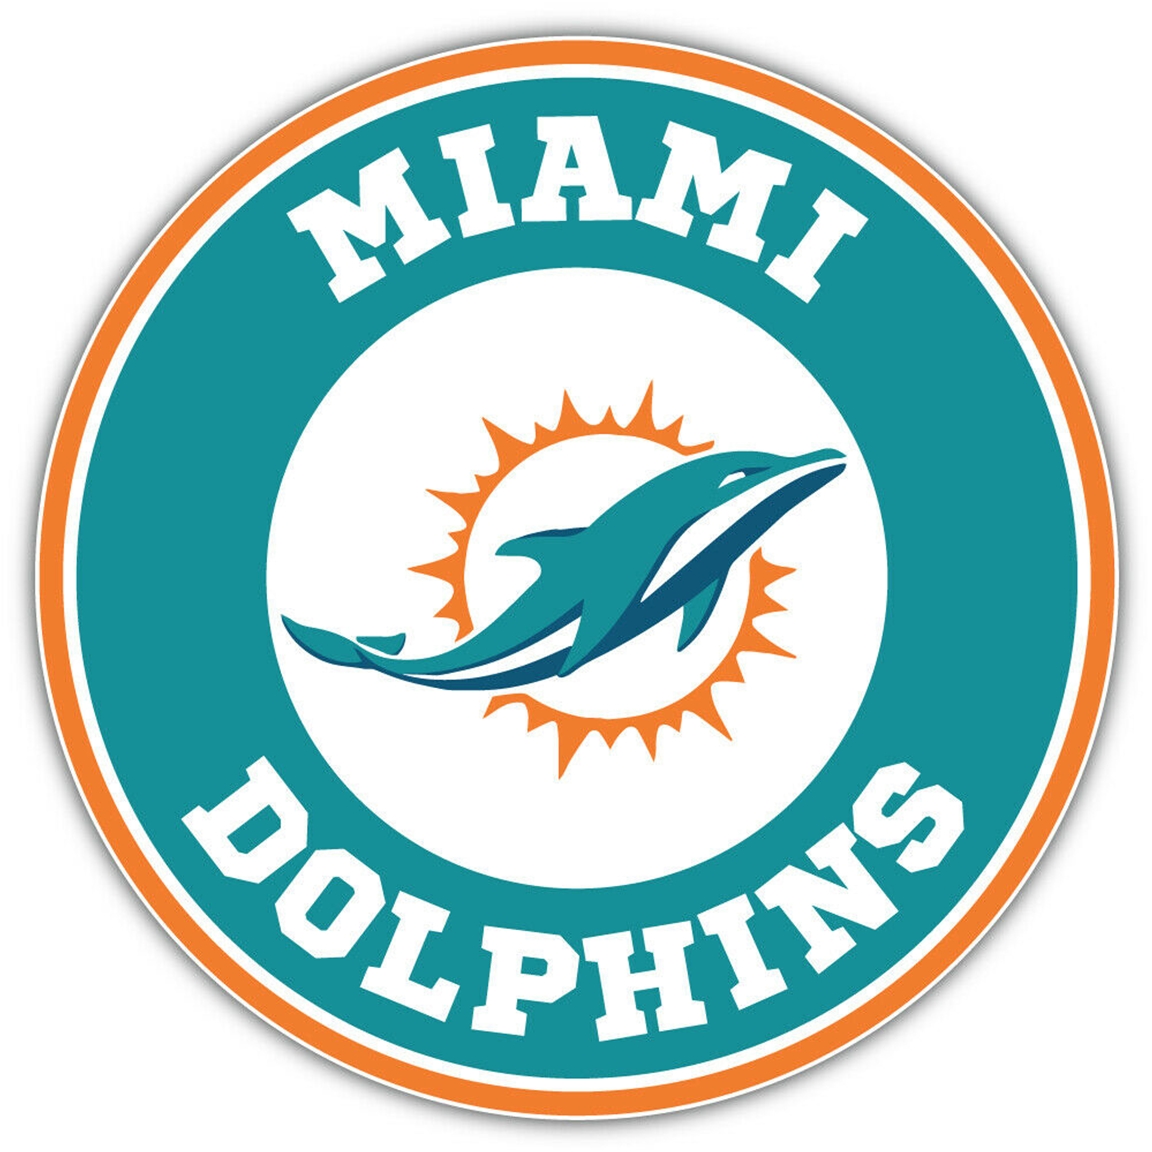 Miami Dolphins Beer Tap